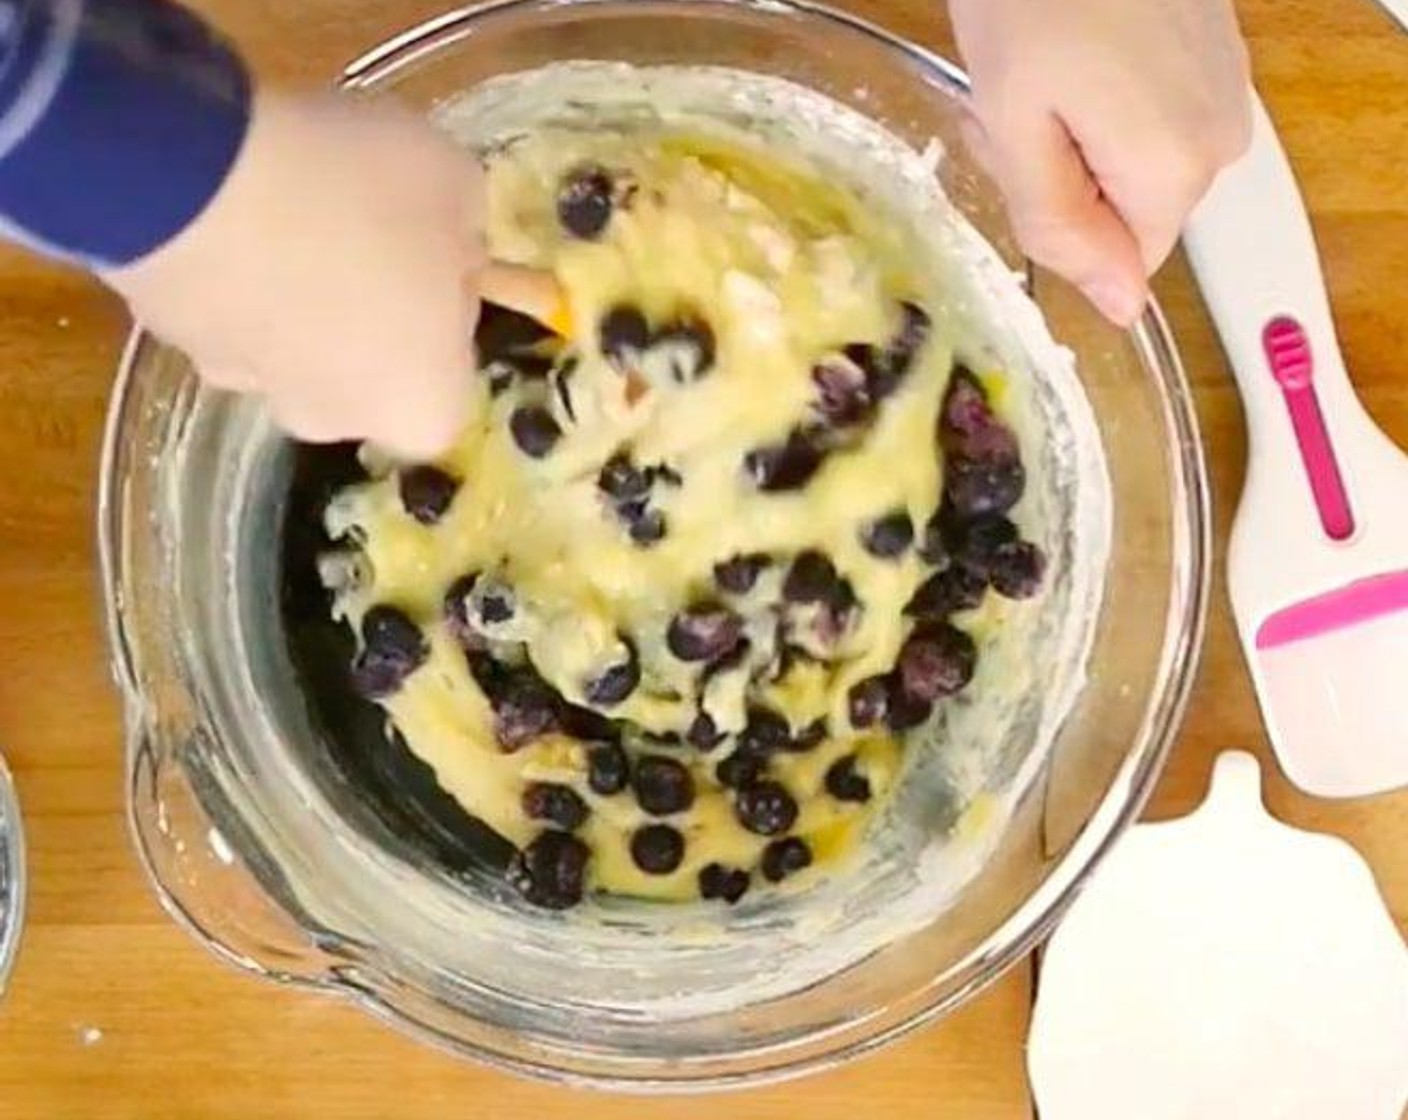 step 4 Fold in Fresh Blueberry (1/2 cup) onto the pan evenly.